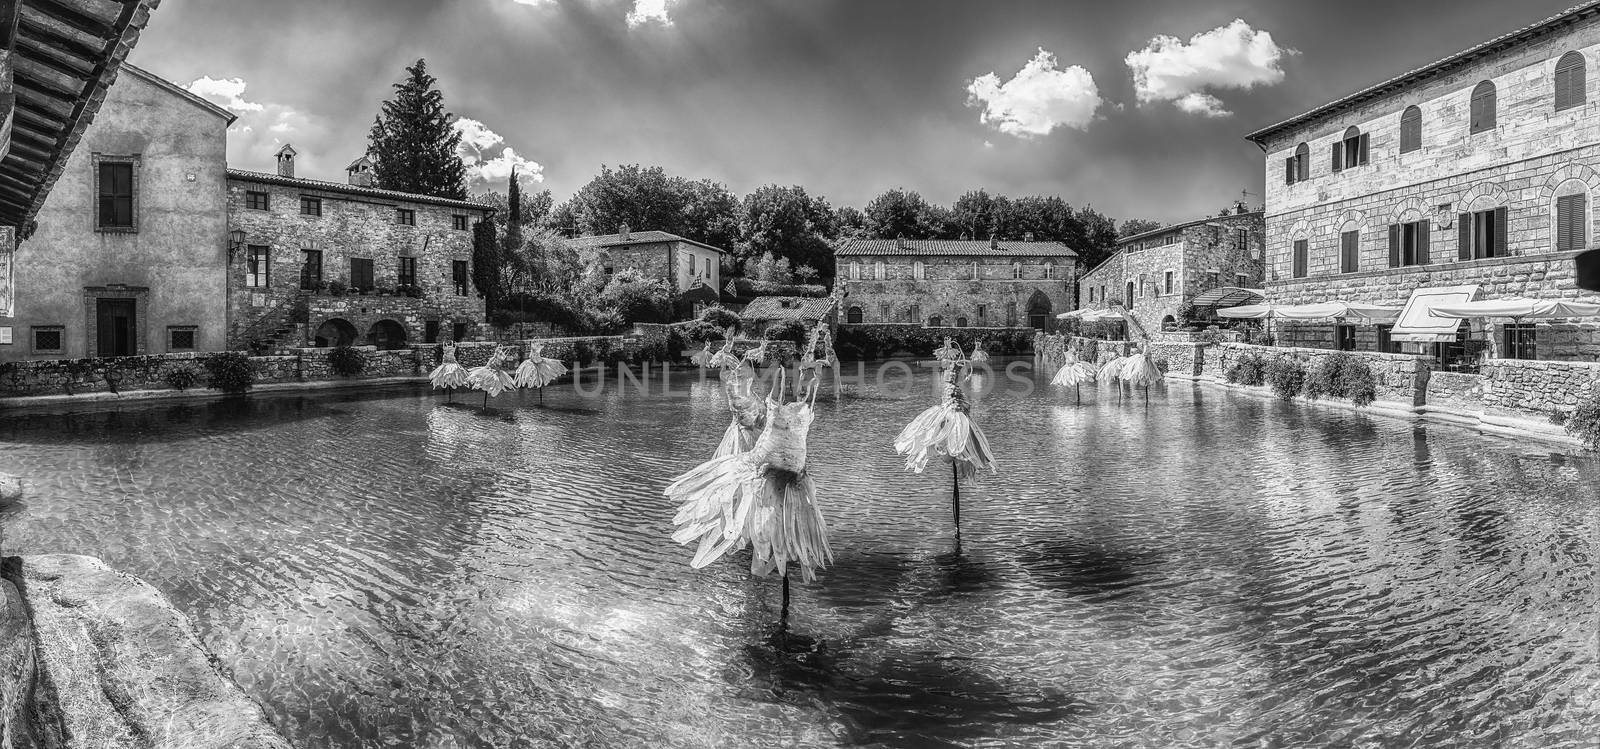 Medieval thermal baths in the town of Bagno Vignoni, Italy by marcorubino